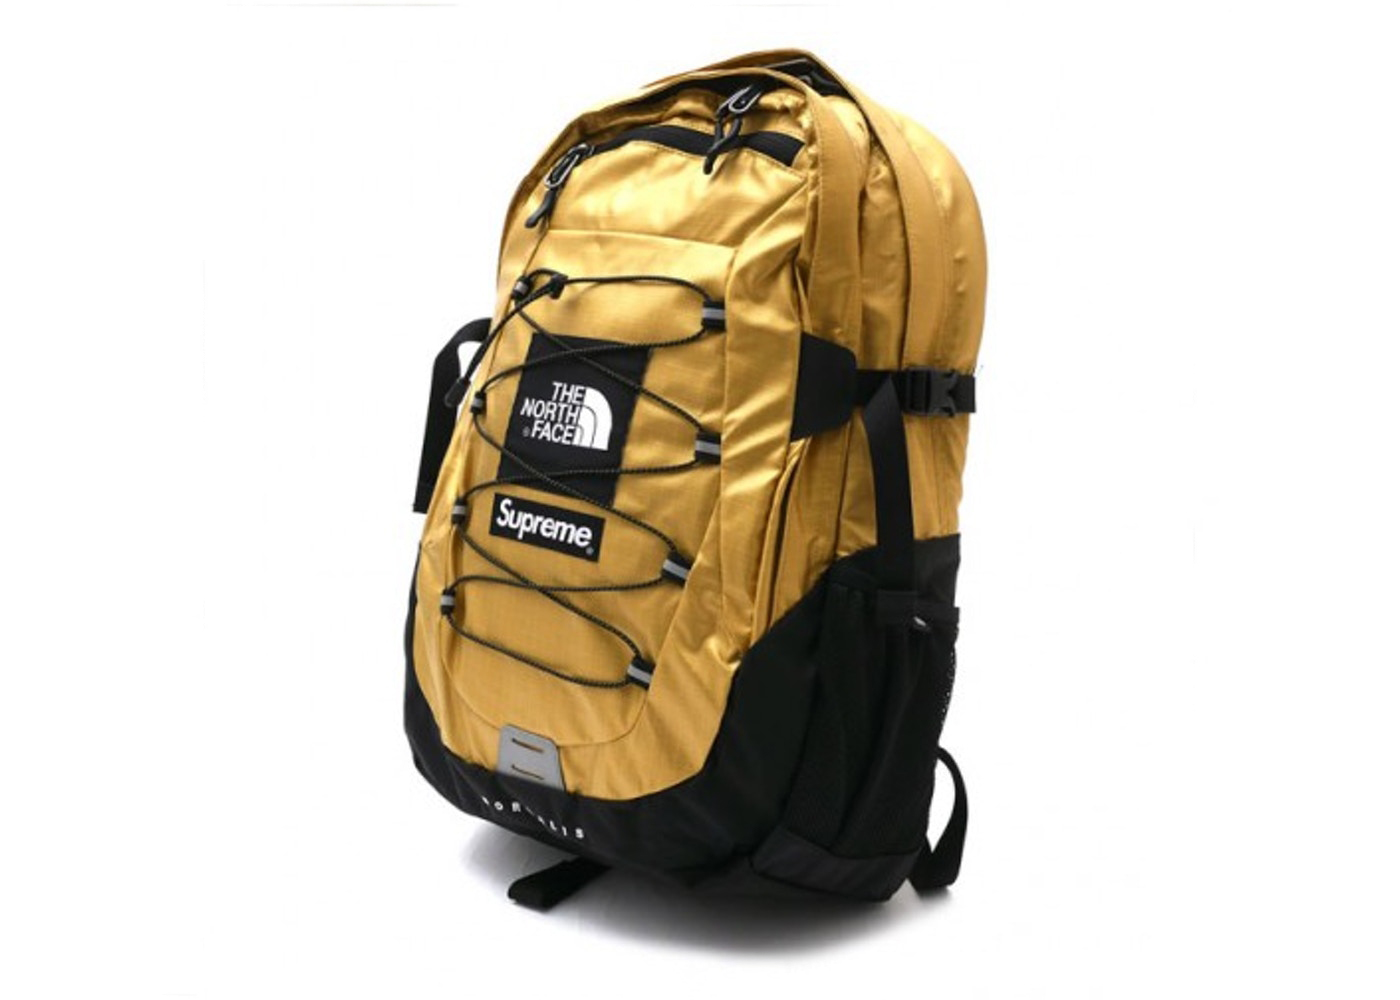 Supreme The North Face Metallic Backpack | www.riomix.com.br